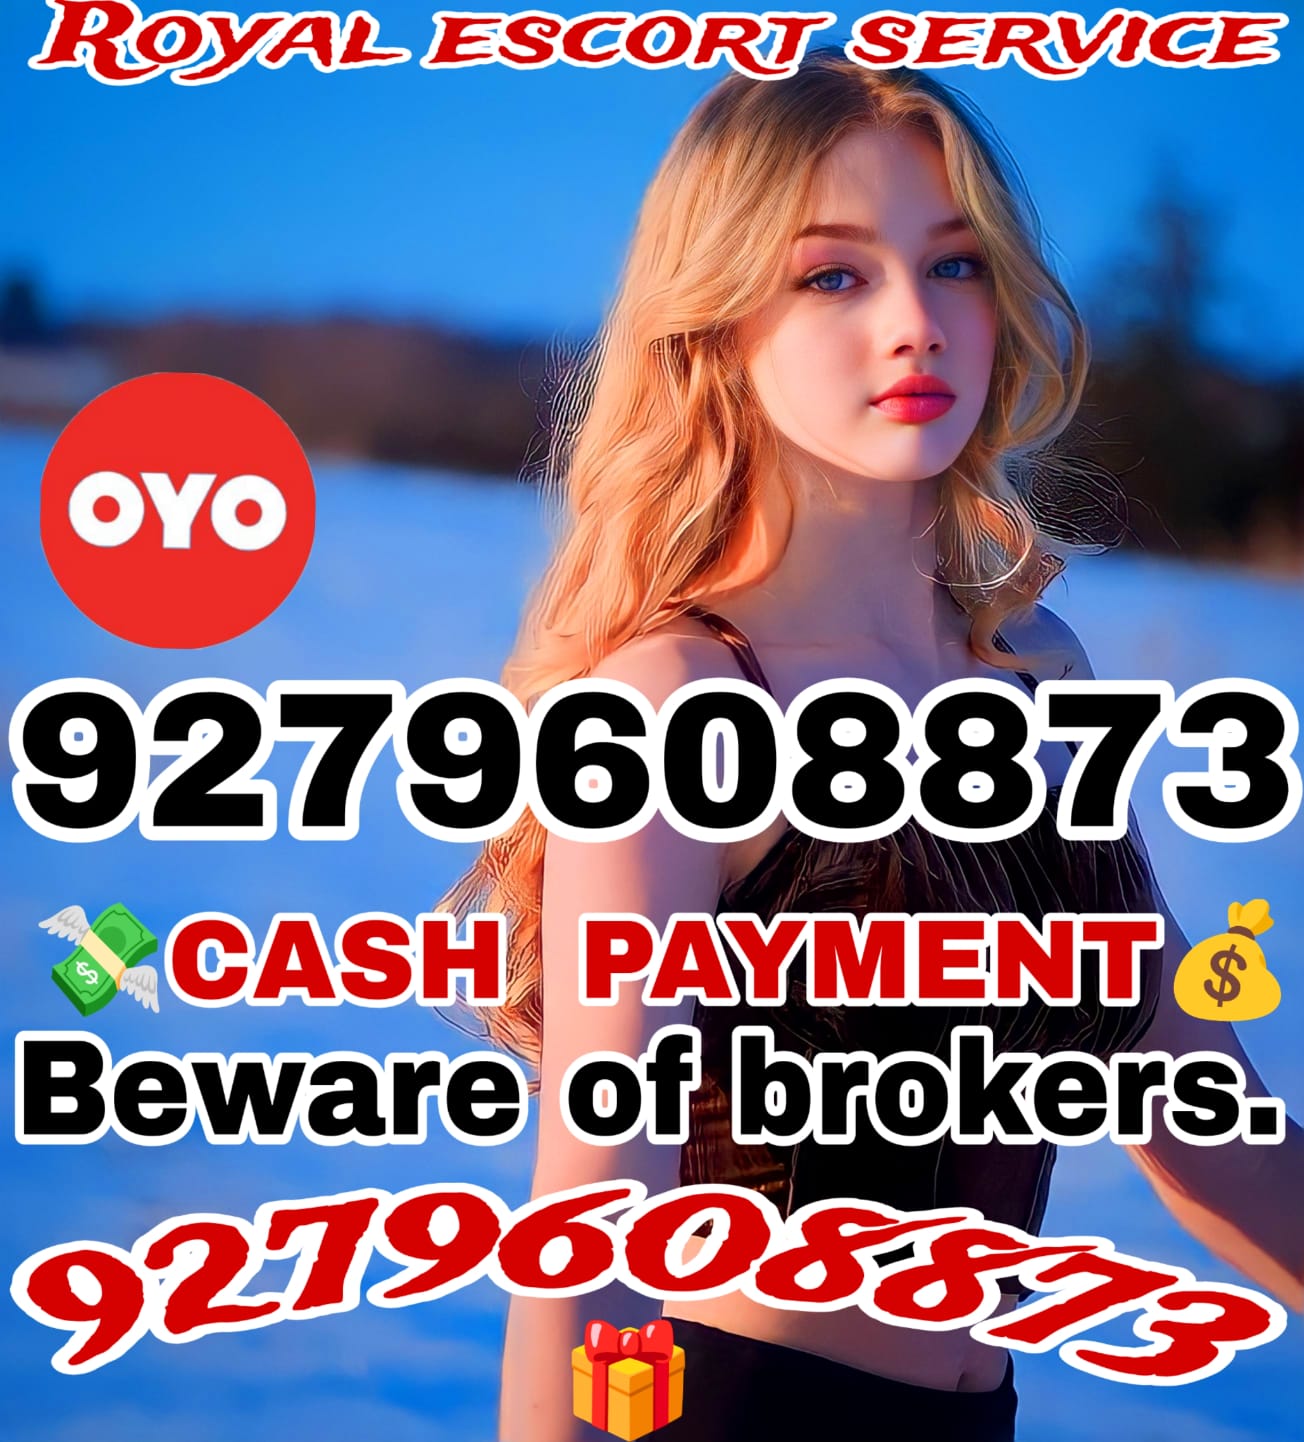 Cash payment hand Tu hand real sex service baby 🔥🔥